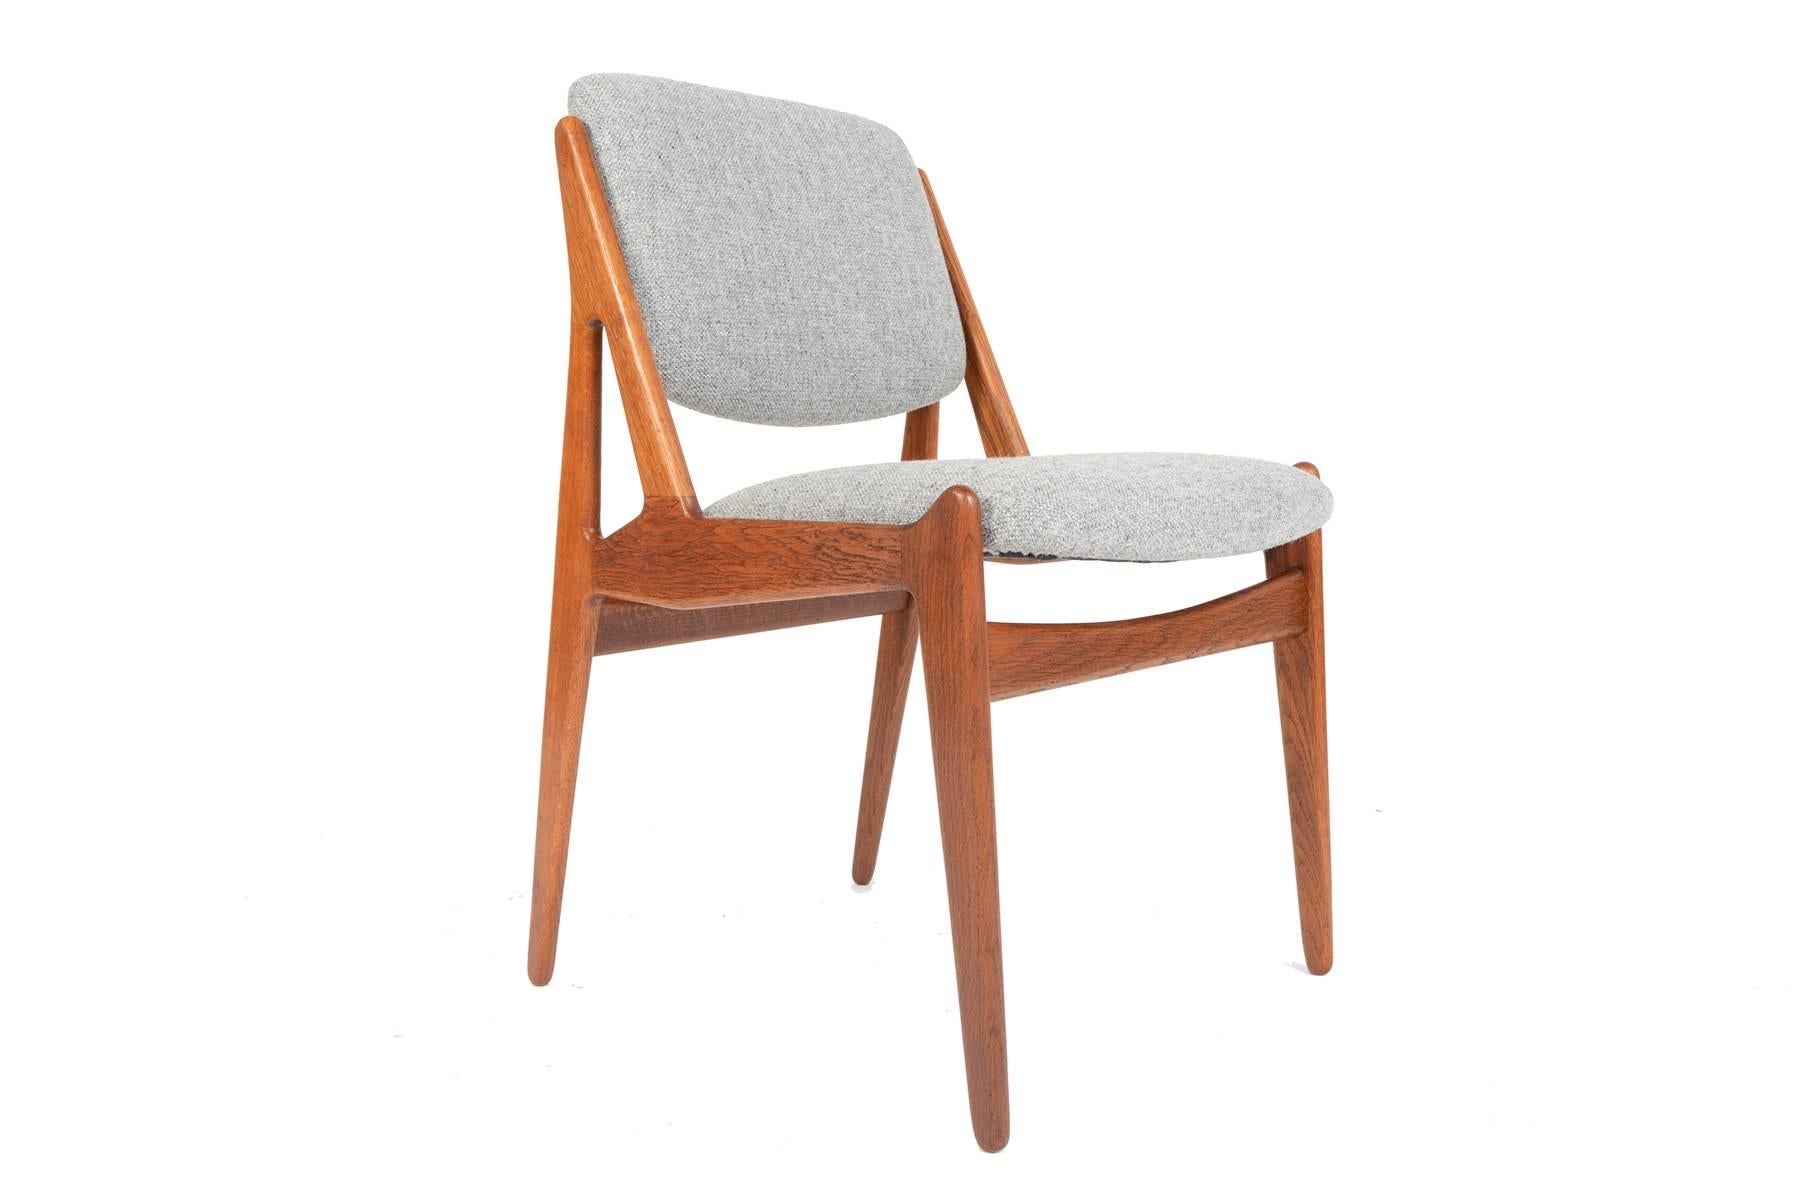 This incredible set of six dining chairs was designed by Arne Vodder for Vamo Møbelfabrik. Known as the 